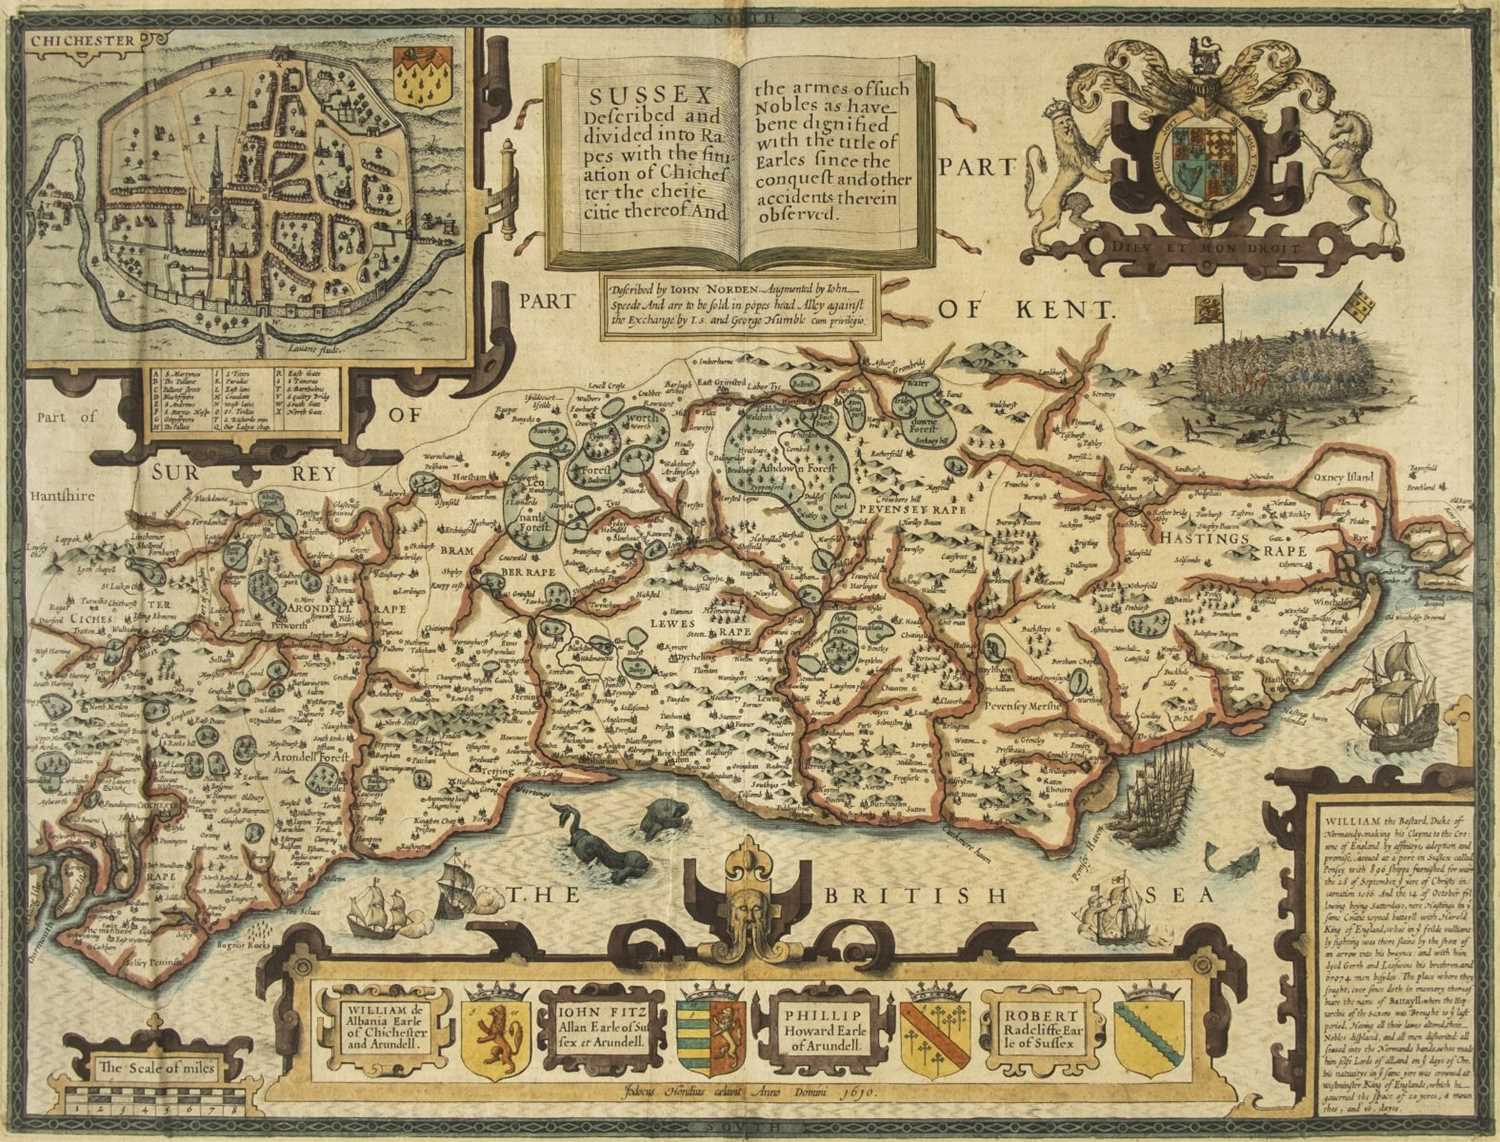 Lot 120 - Sussex. Norden (John & Speed John), Sussex described and divided into Rapes..., 1616